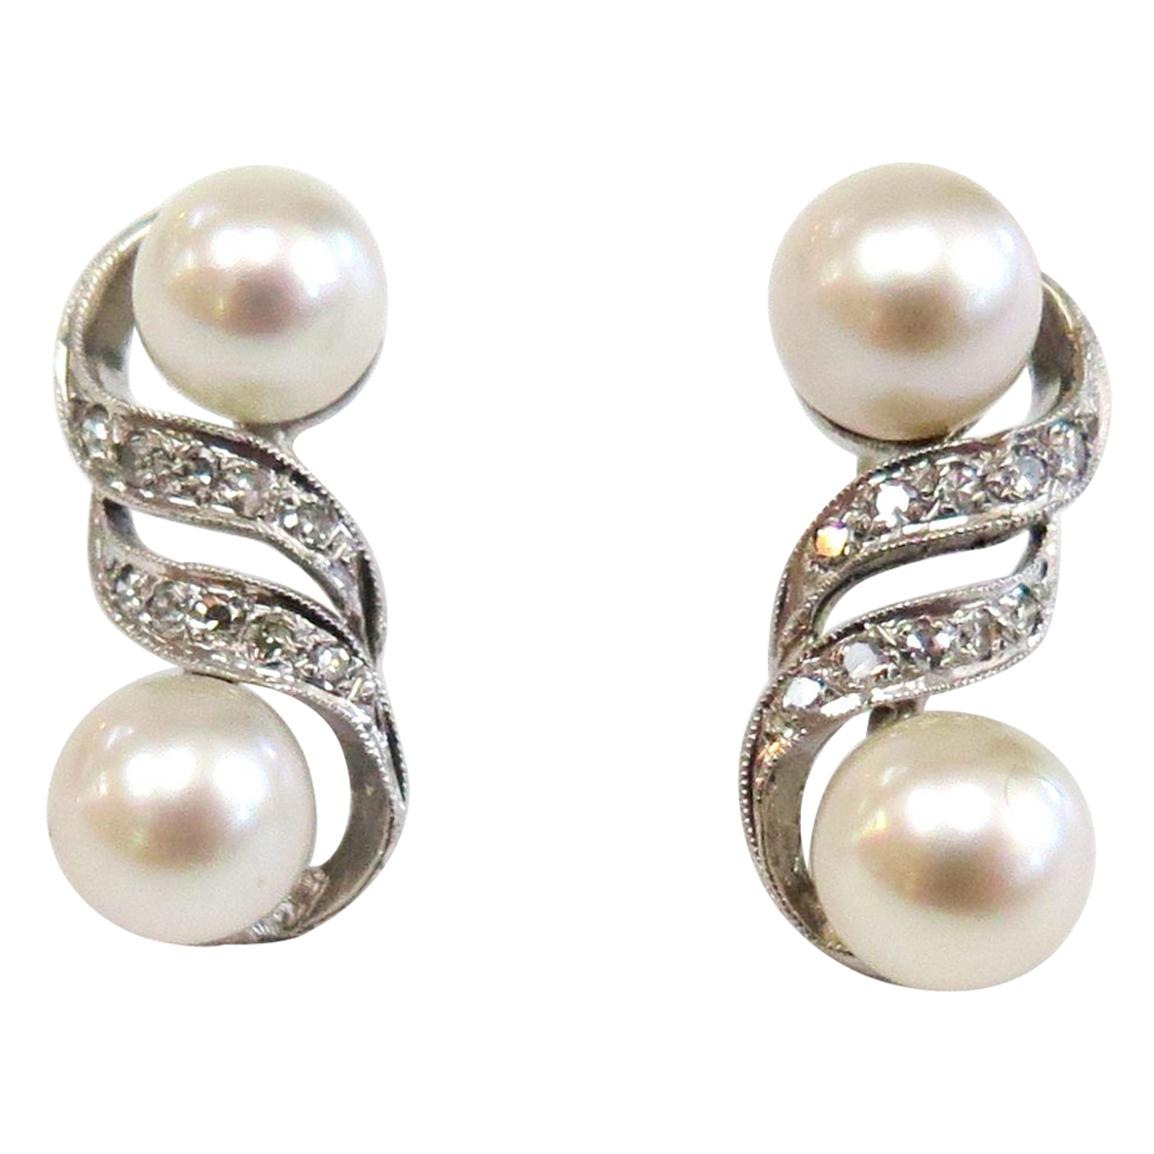 Vintage 1950s Double Pearl Cultured Earrings with Diamonds / 14 Karat White Gold